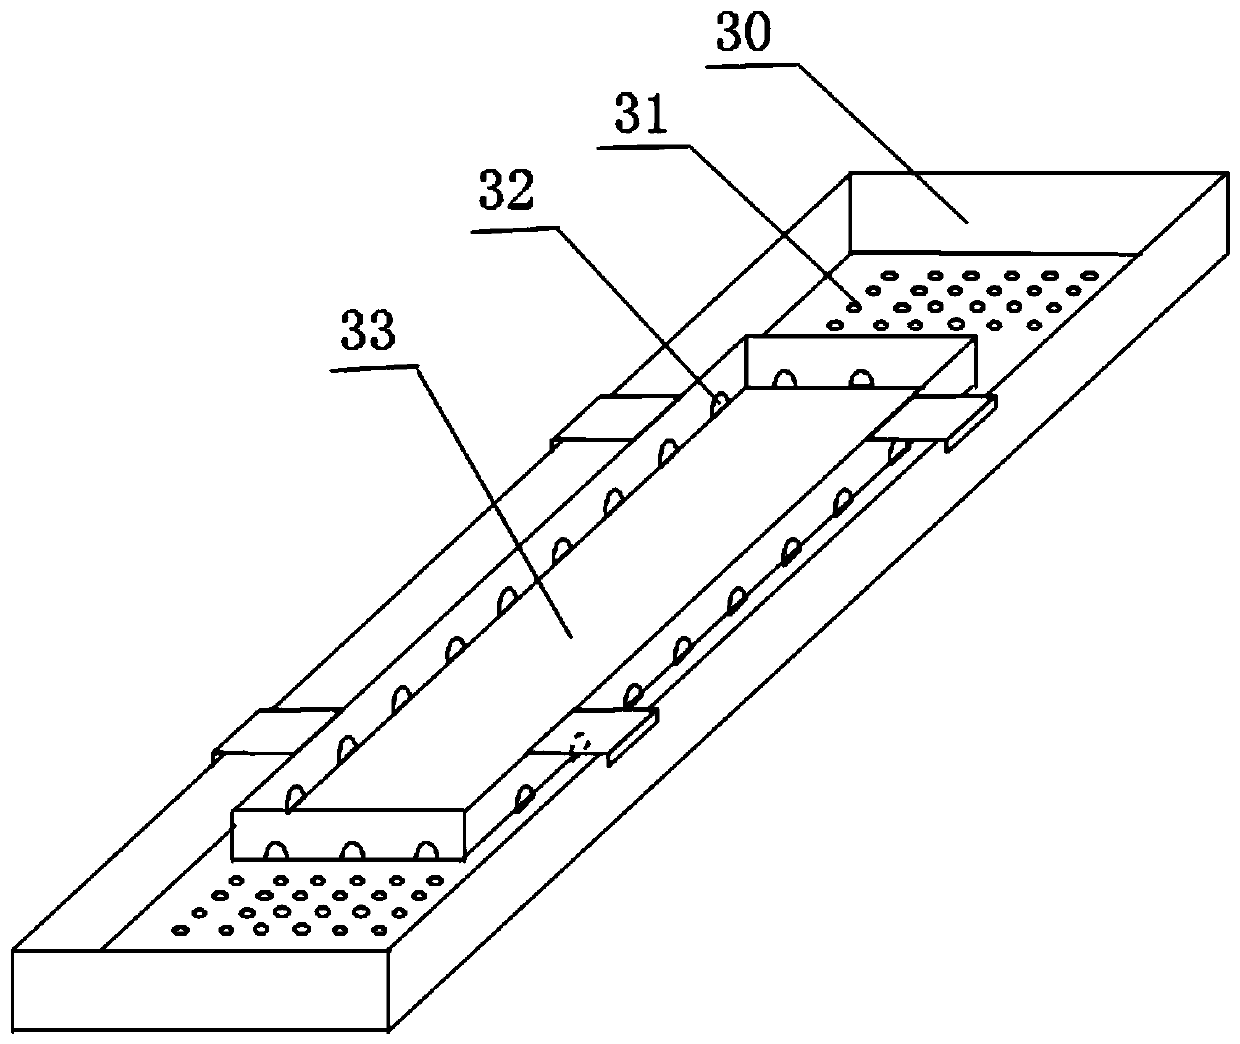 Sulfur wet forming granulation production system and production process